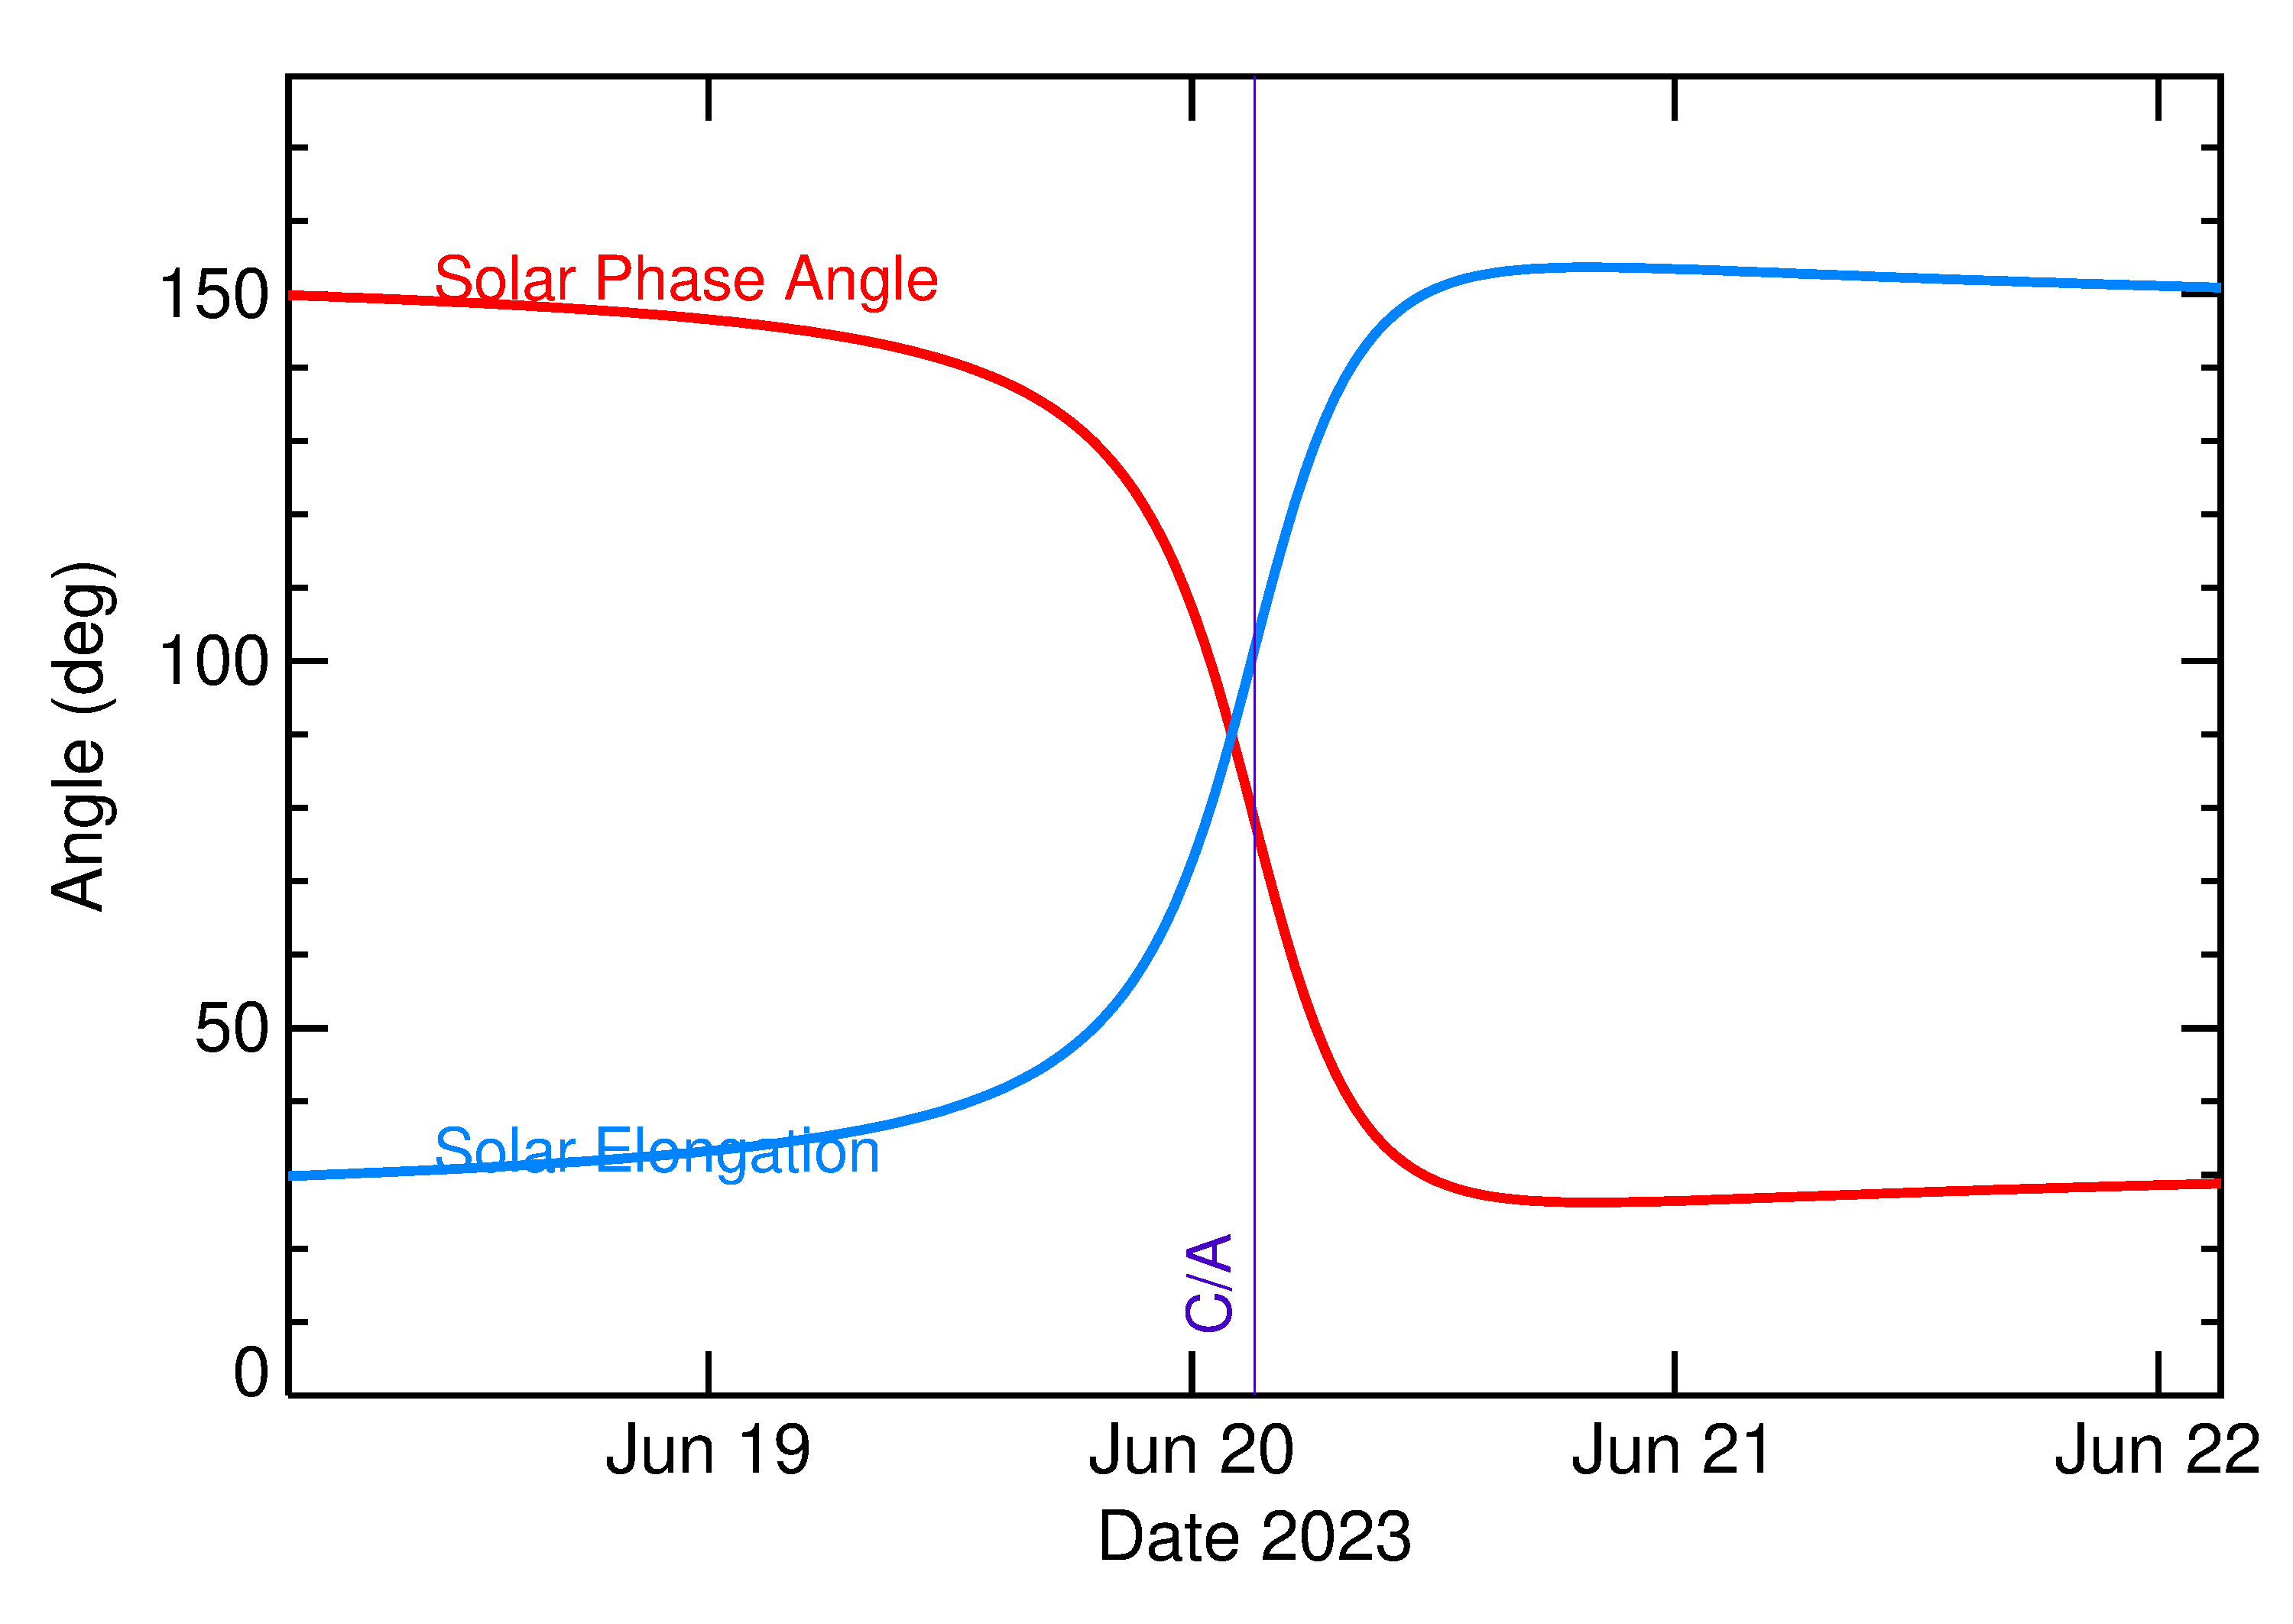 Solar Elongation and Solar Phase Angle of 2023 MB3 in the days around closest approach